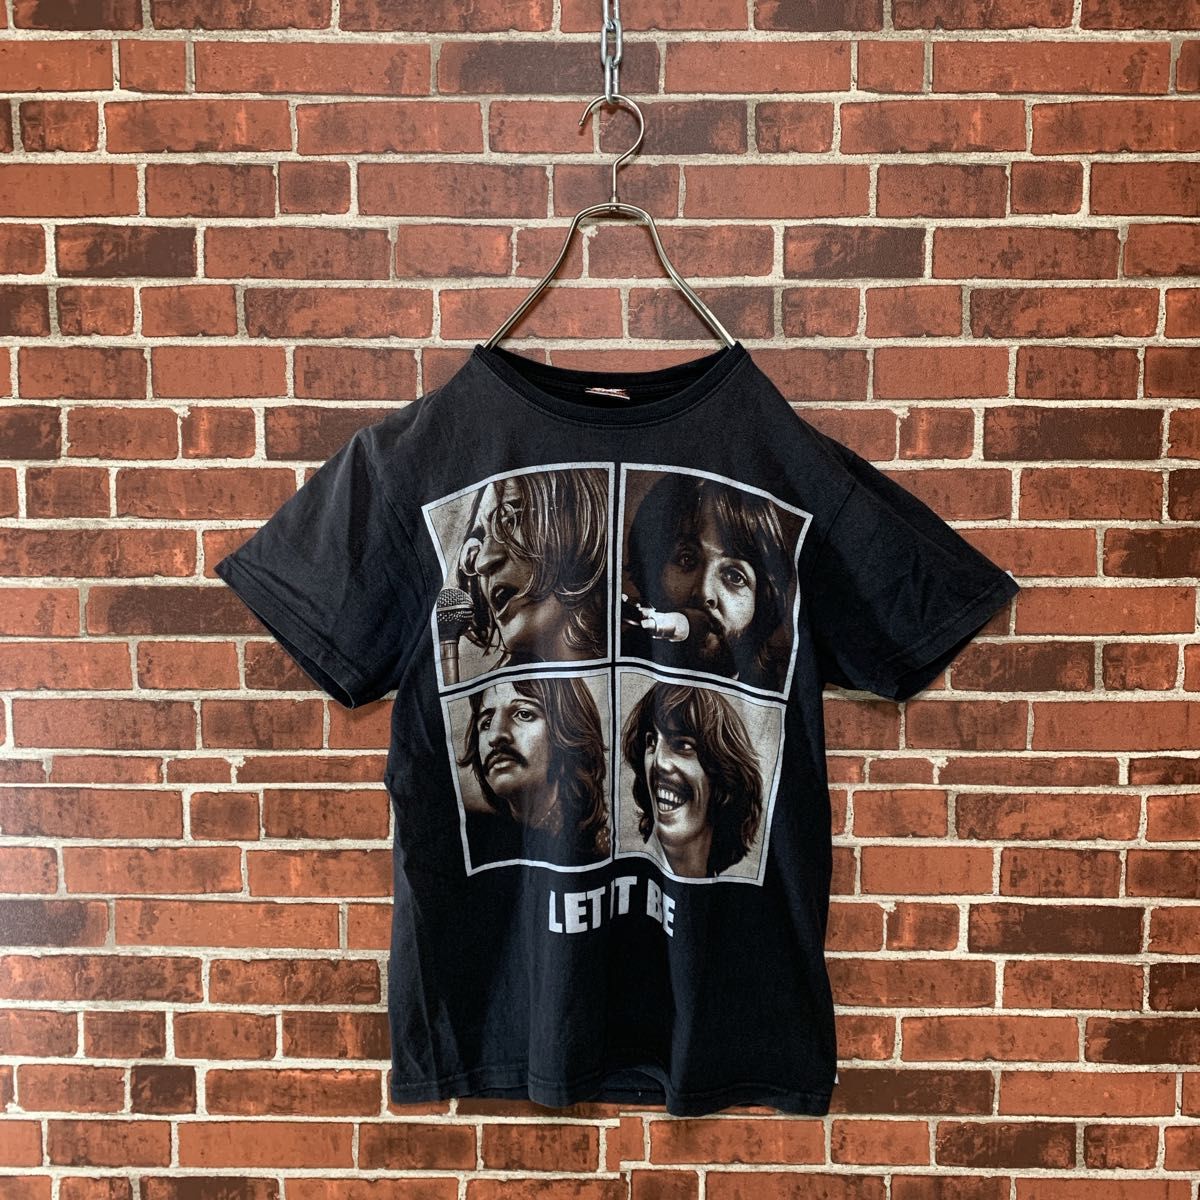 【HOT ROCK】THE BEATLES ビートルズ　let it be グラフィック　両面プリント　バンドTシャツ　M 古着